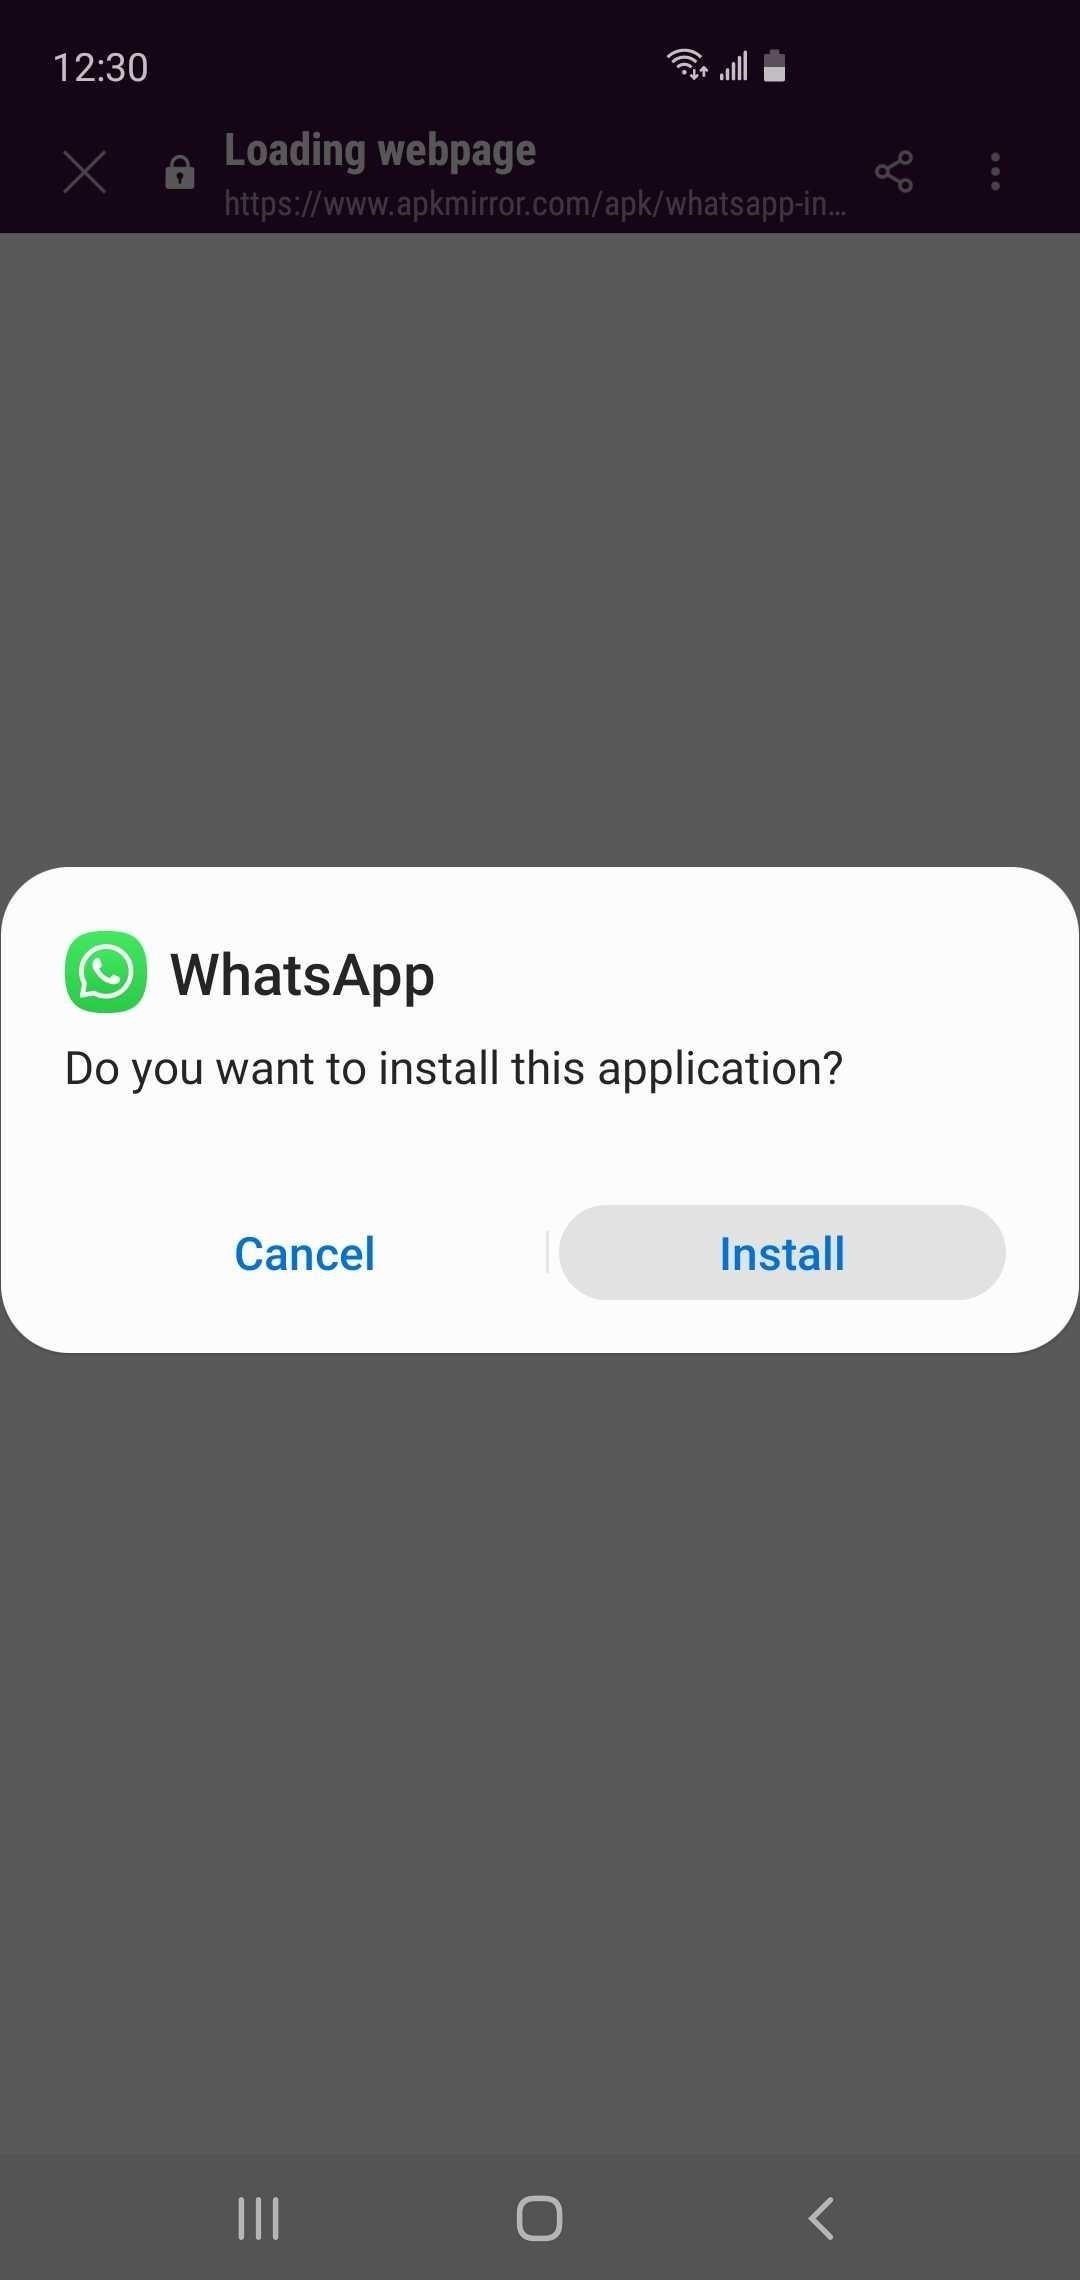 You Can Get WhatsApp's New Official Dark Mode on Android Right Now